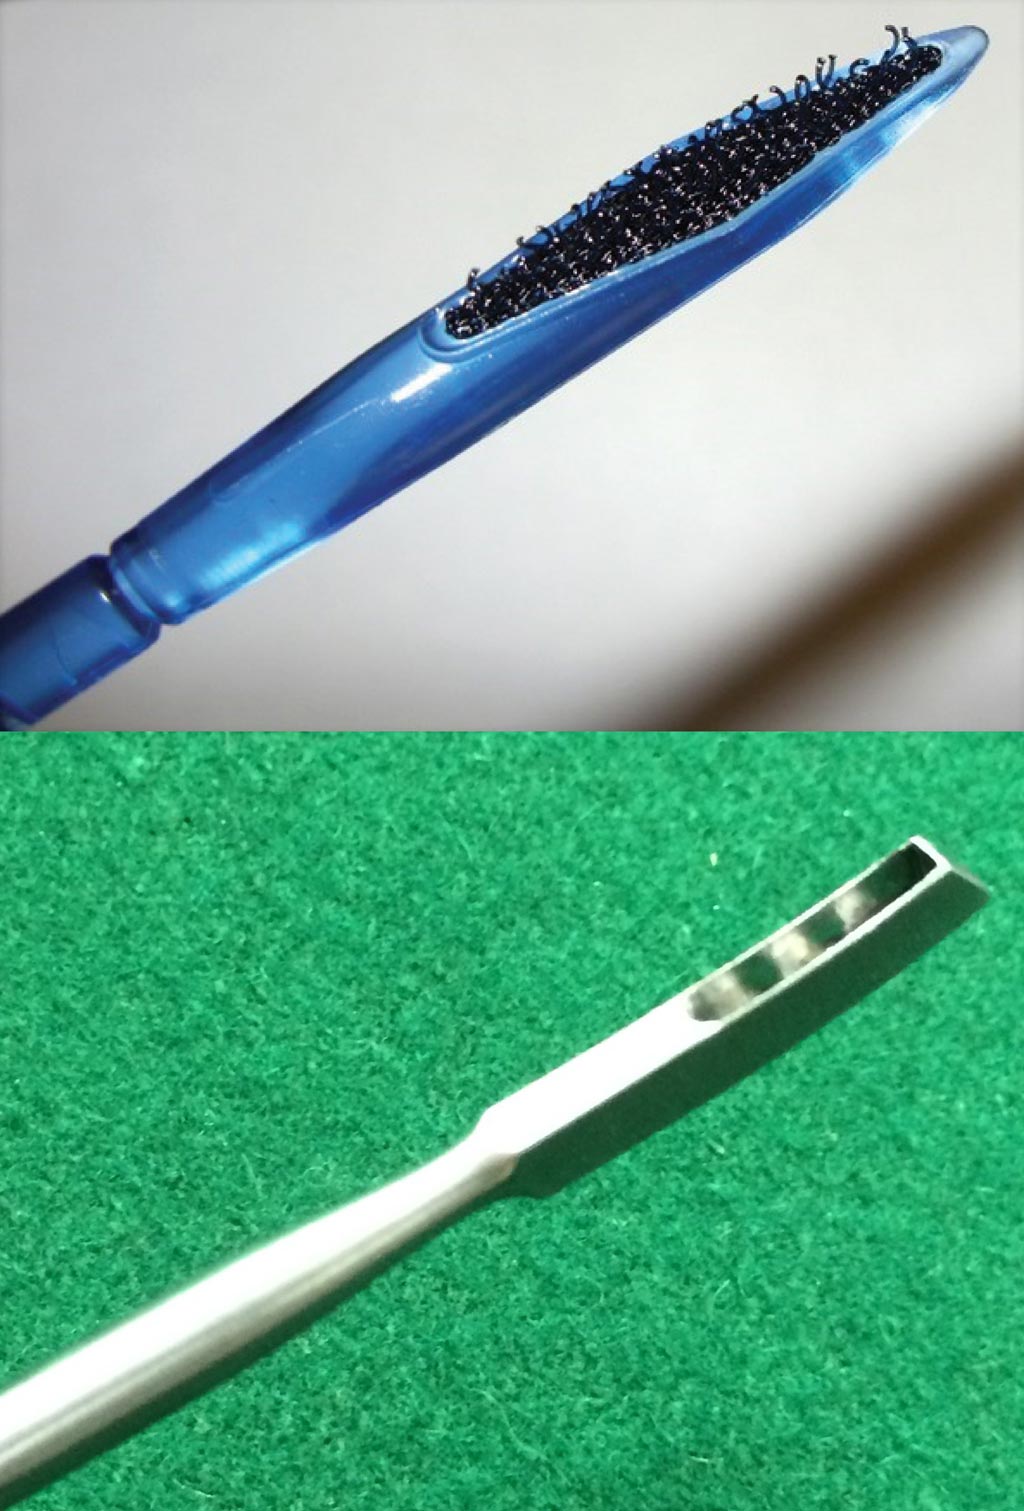 Image: The new fabric-based Velcro-like device (top), and the currently used standard metal scraping-device (bottom) (Photo courtesy of J. Diedrich, UC Riverside).